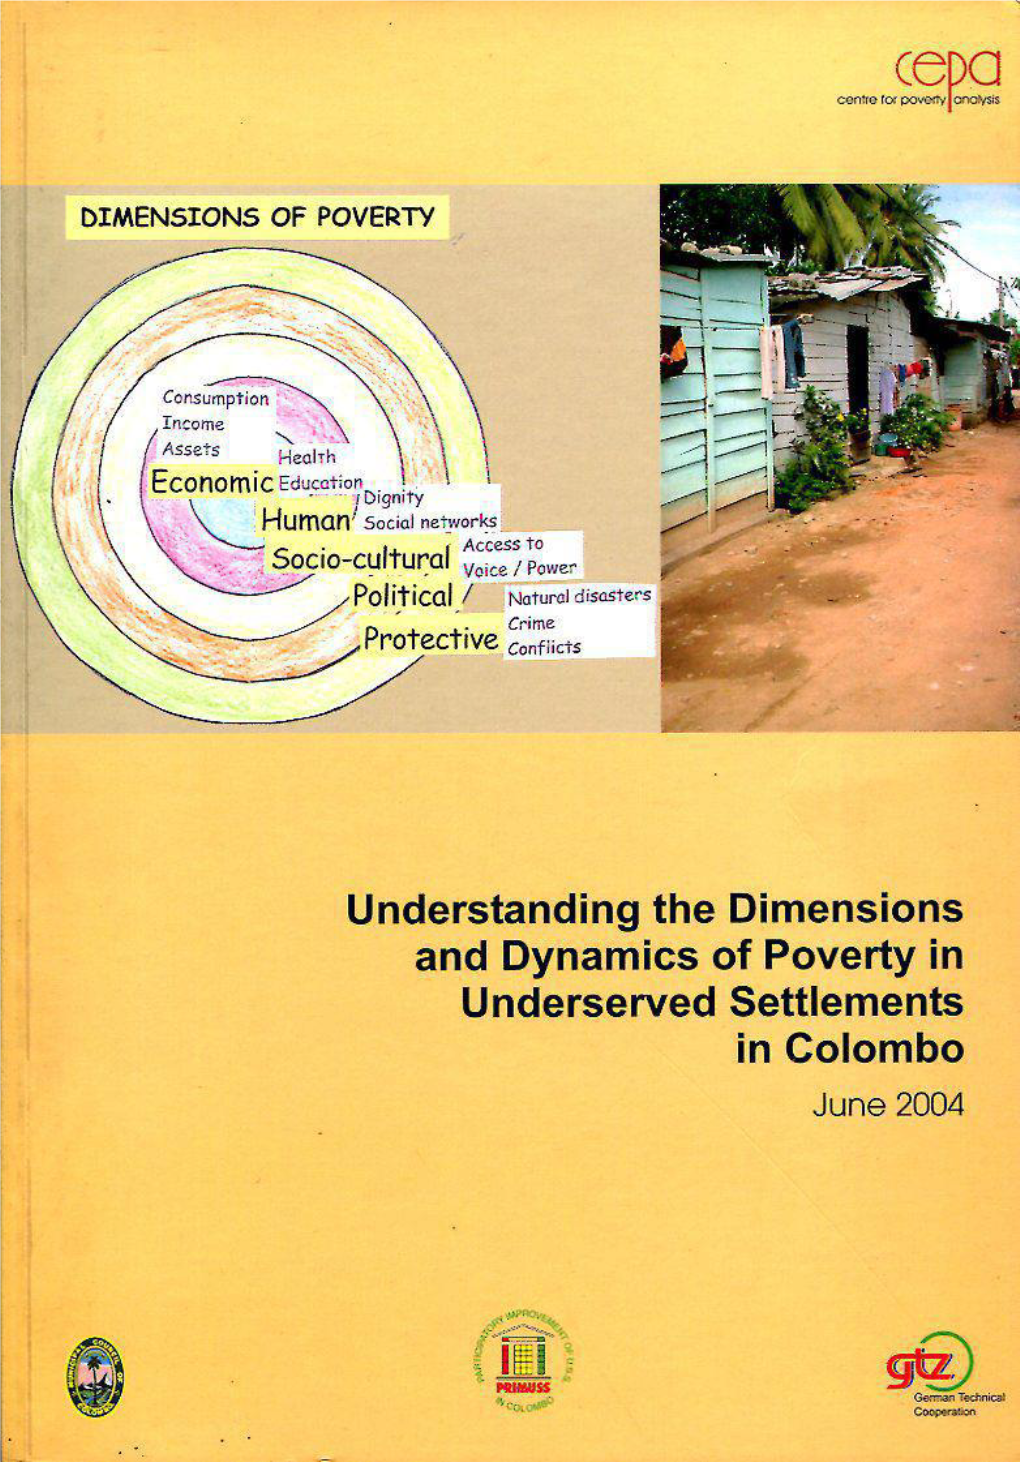 Understanding the Dimensions and Dynamics of Poverty in Underserved Settlements in Colombo